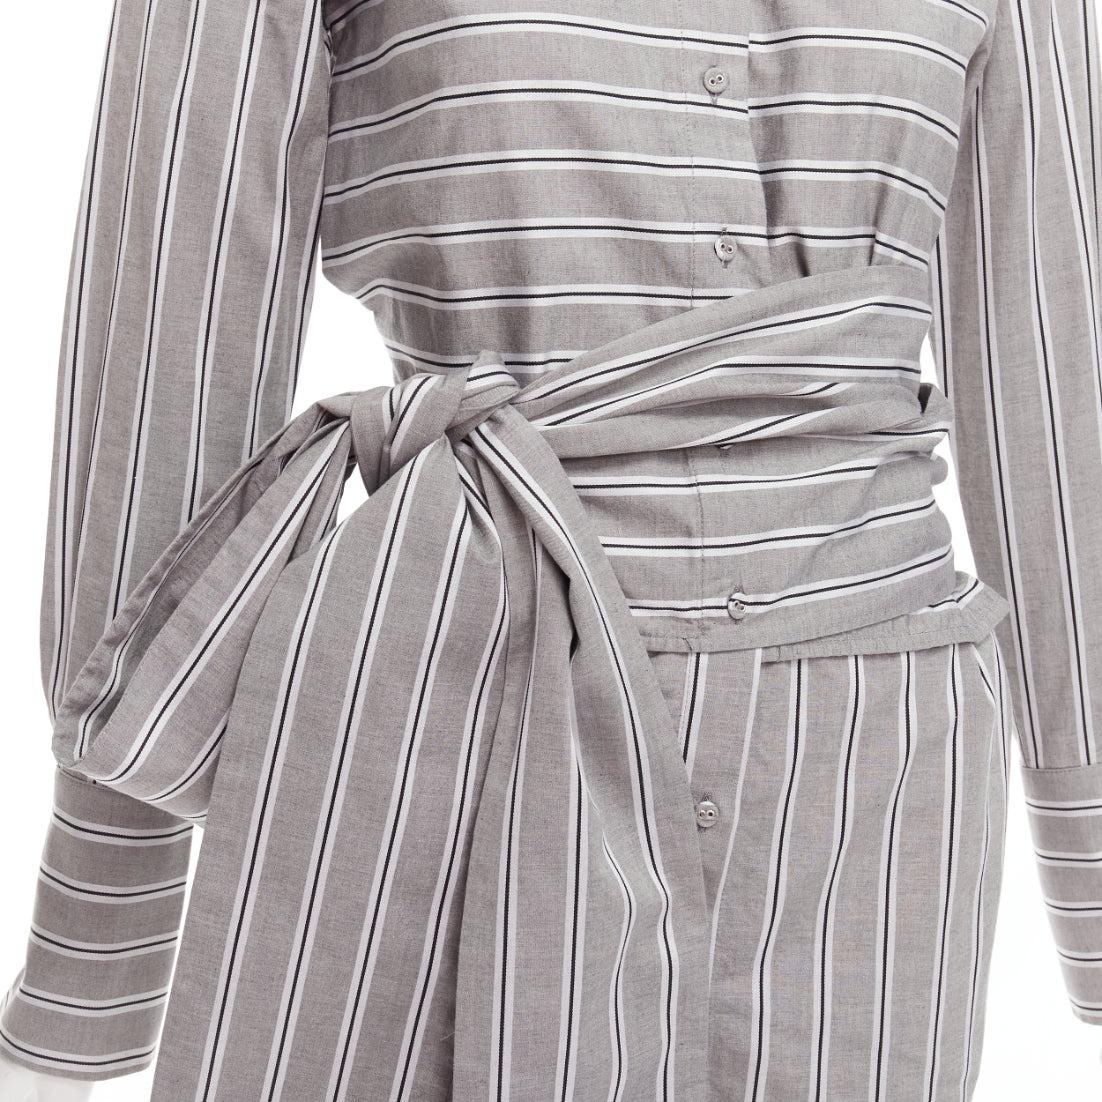 VVB VICTORIA BECKHAM grey striped cotton oversized sash belt tunic shirt UK6 XS
Reference: JACG/A00125
Brand: VVB Victoria Beckham
Designer: Victoria Beckham
Collection: VVB
Material: Cotton
Color: White, Grey
Pattern: Striped
Closure: Button
Made